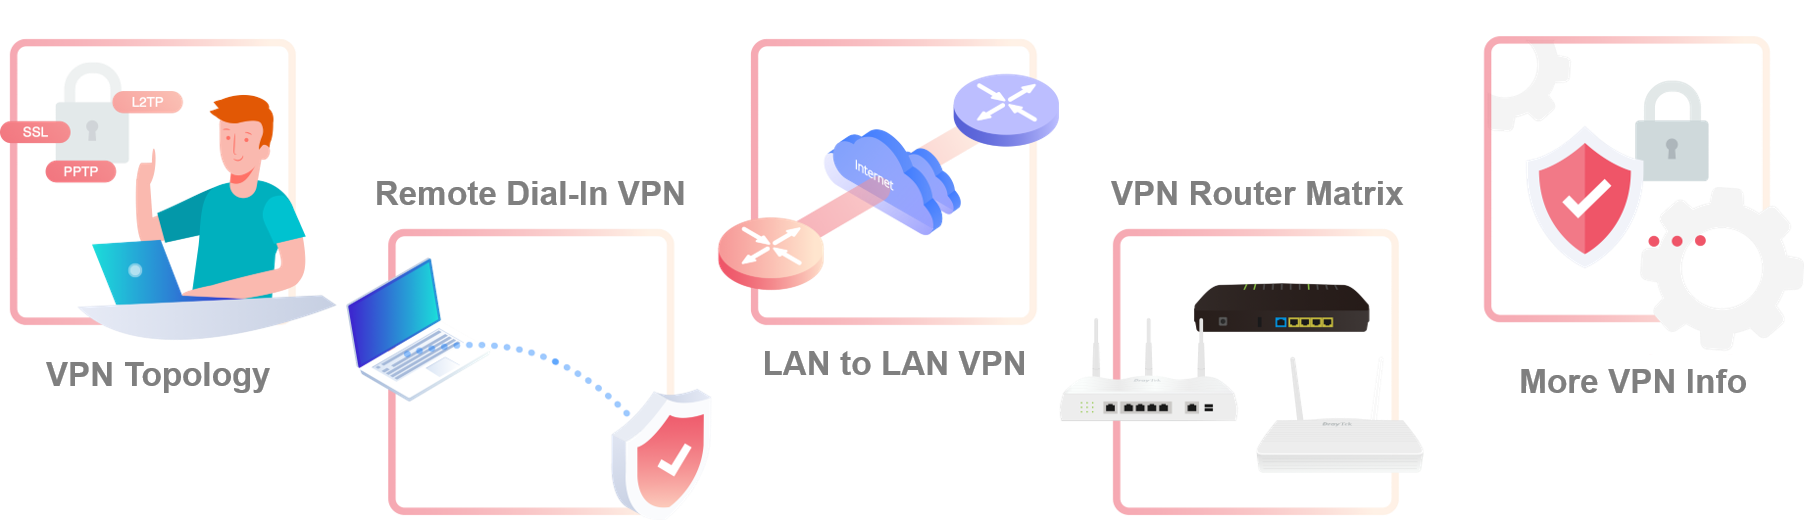 Work from Home VPN Solution in 5 steps